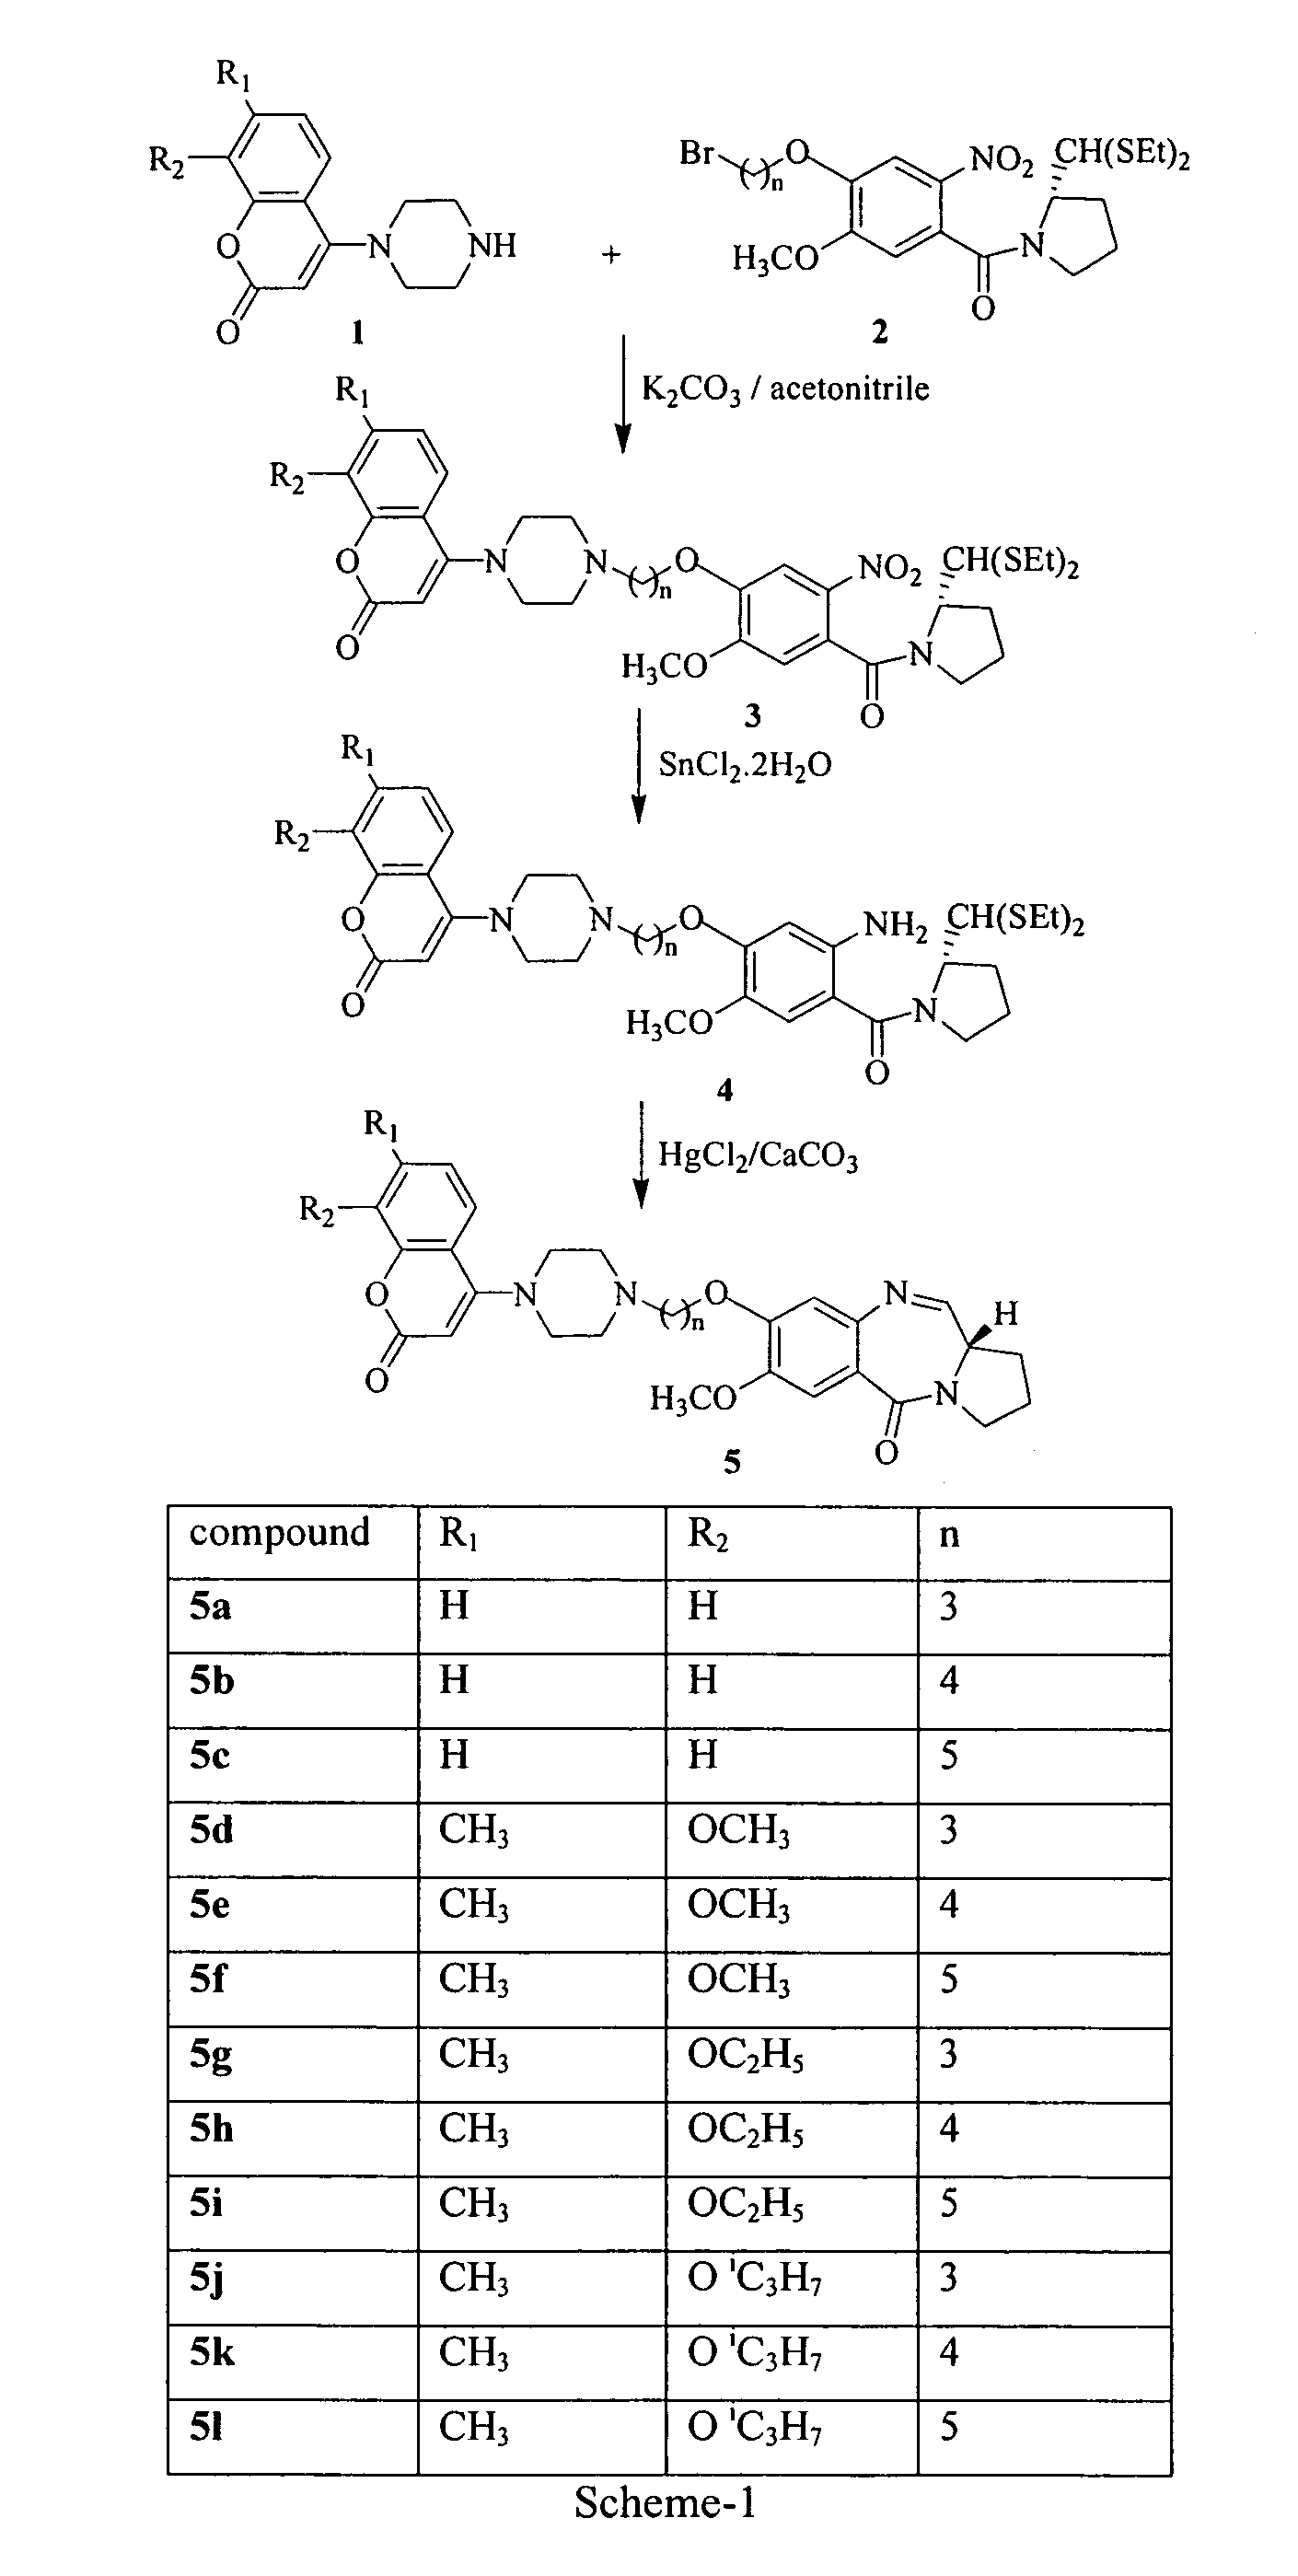 Pyrrolo[2,1-c][1,4]benzodiazepine compounds and processes for the preparation thereof